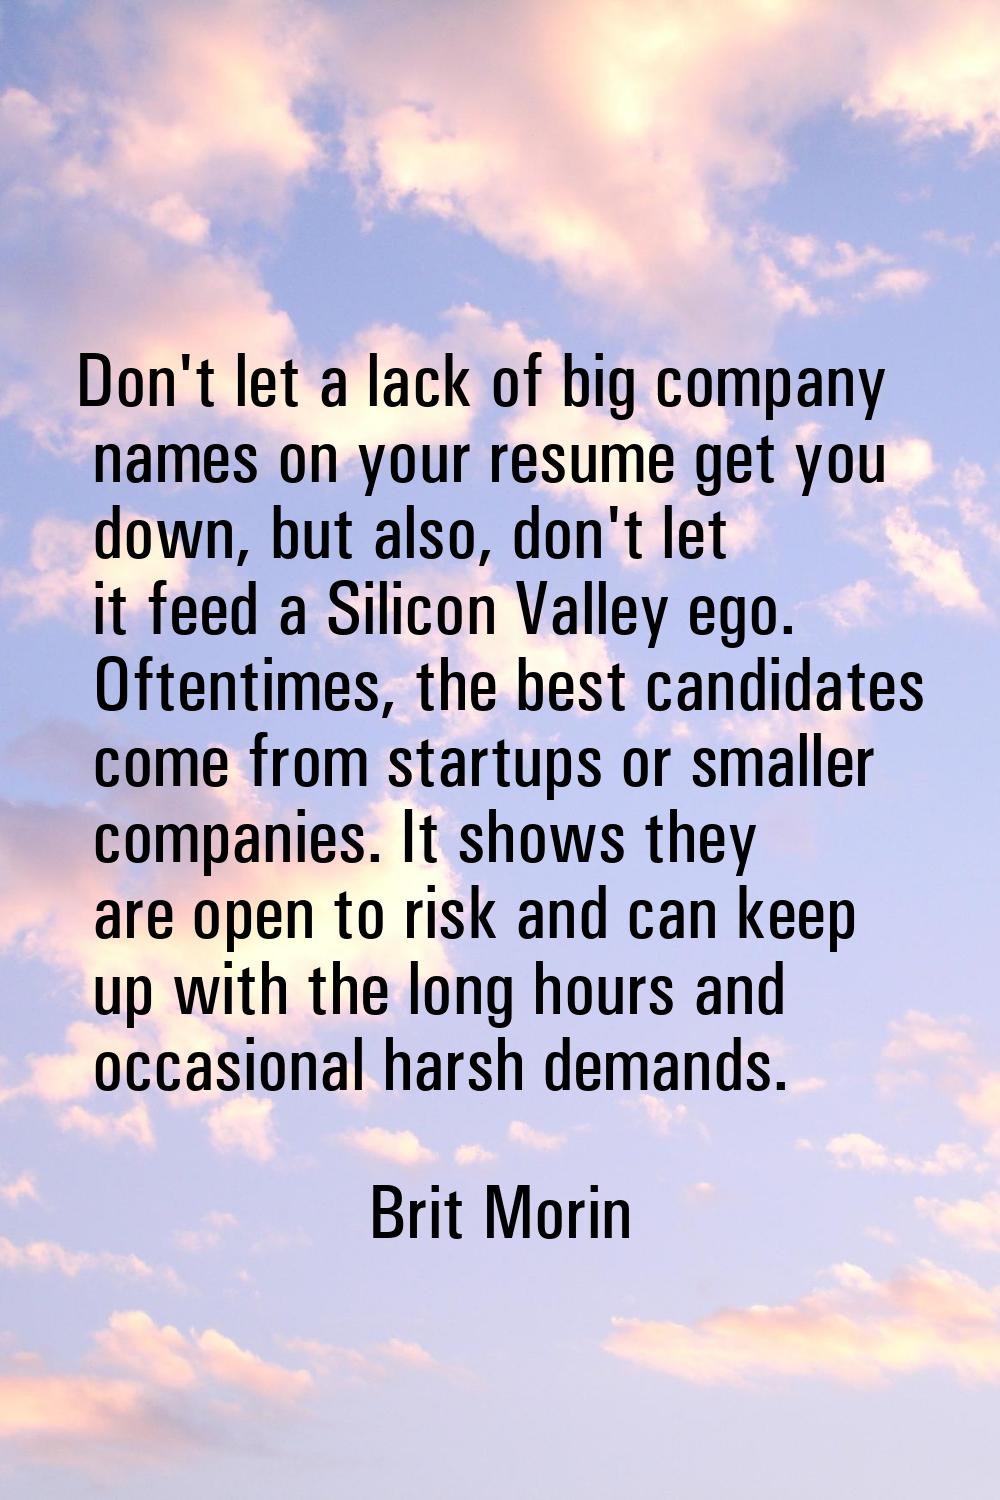 Don't let a lack of big company names on your resume get you down, but also, don't let it feed a Si